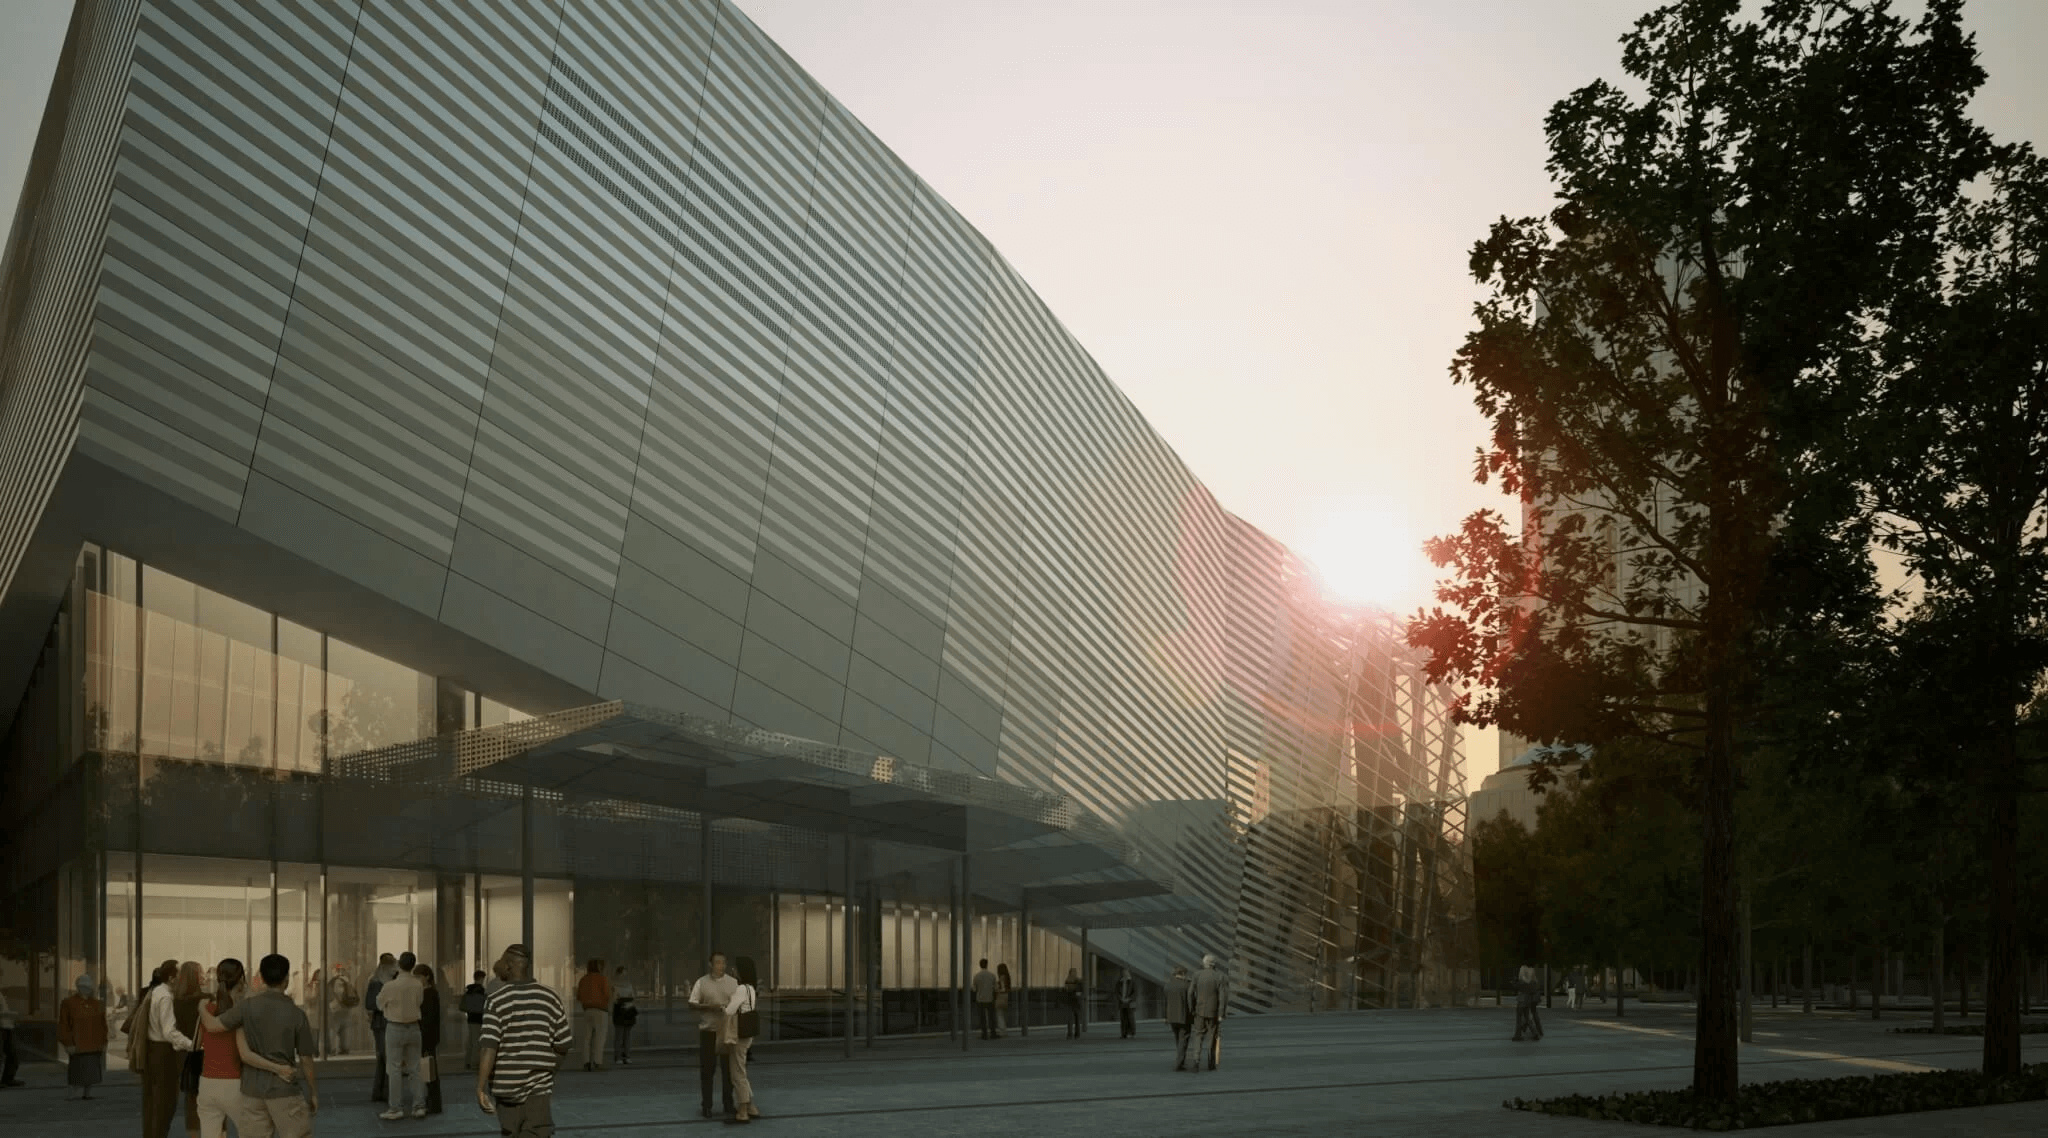 Museum-Pavilion-Exterior-at-dusk-Rendering-by-Squared-Design-Lab-Provided-by-NS11MM